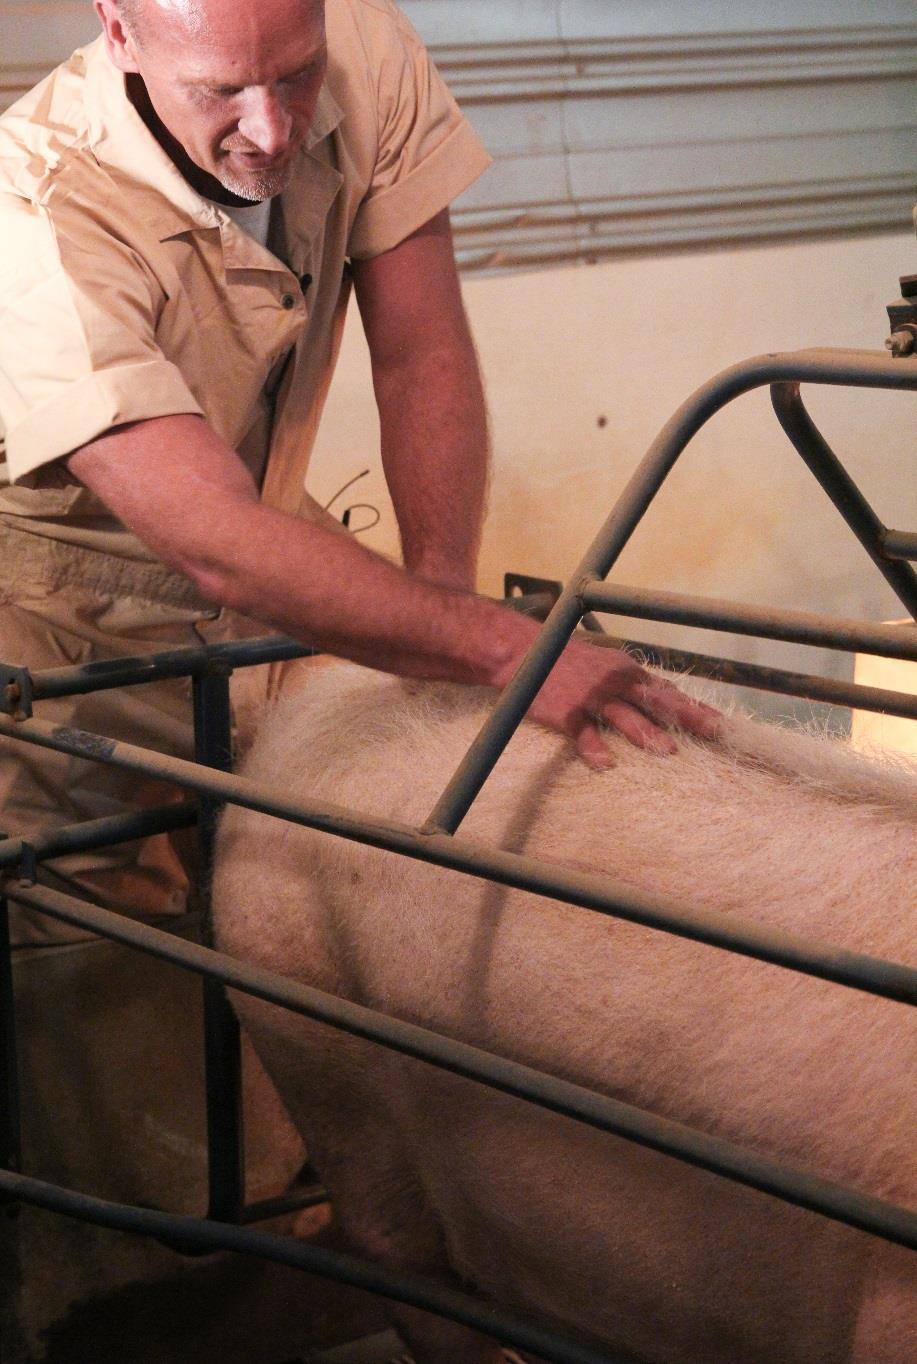 We can become more effective handlers, and help to create a safer environment for pigs and people